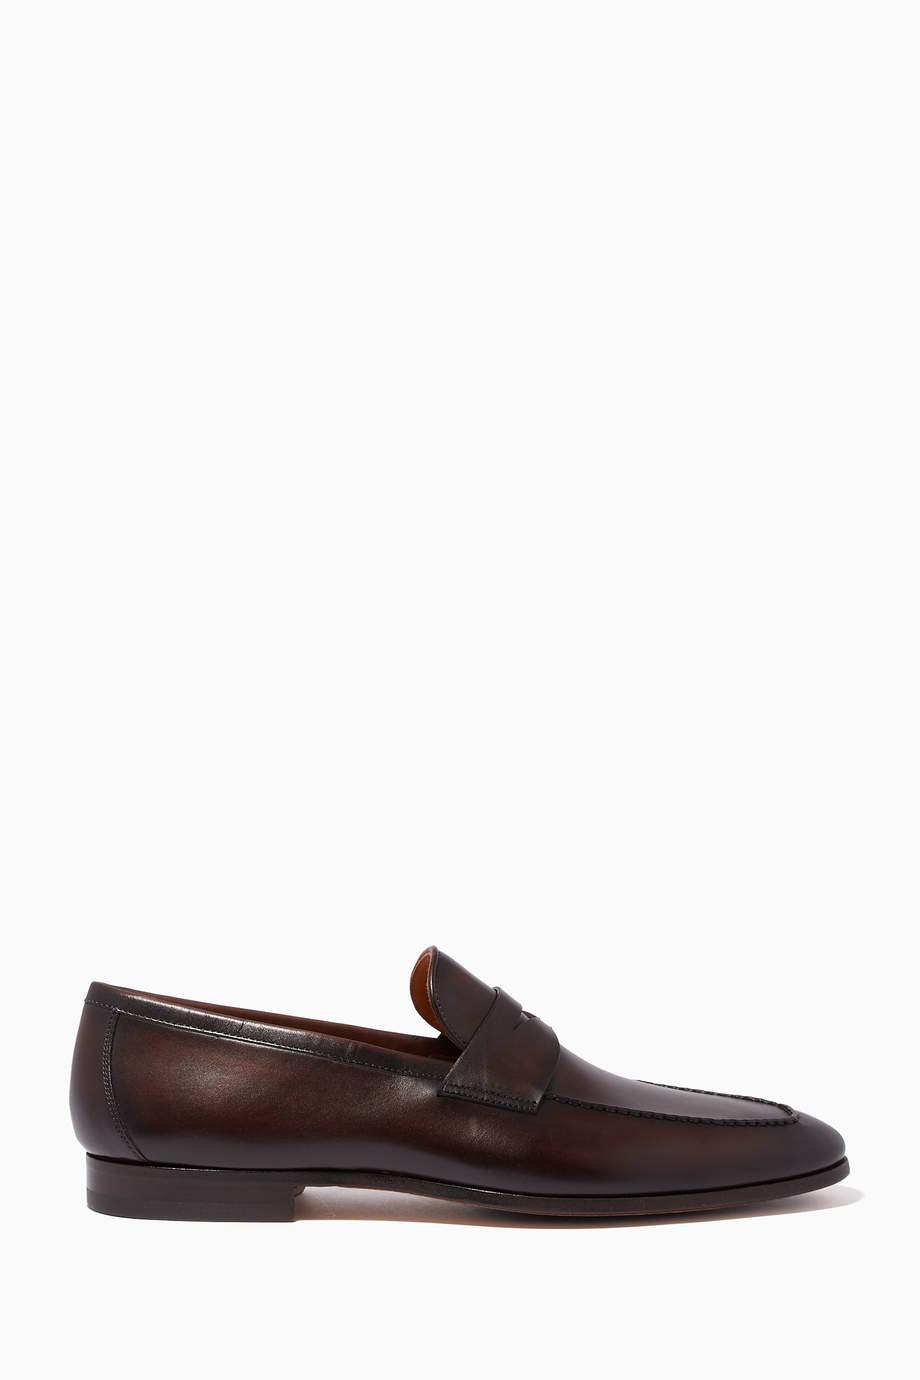 Shop Magnanni Brown Classic Penny Loafers in Flex Leather for Men ...